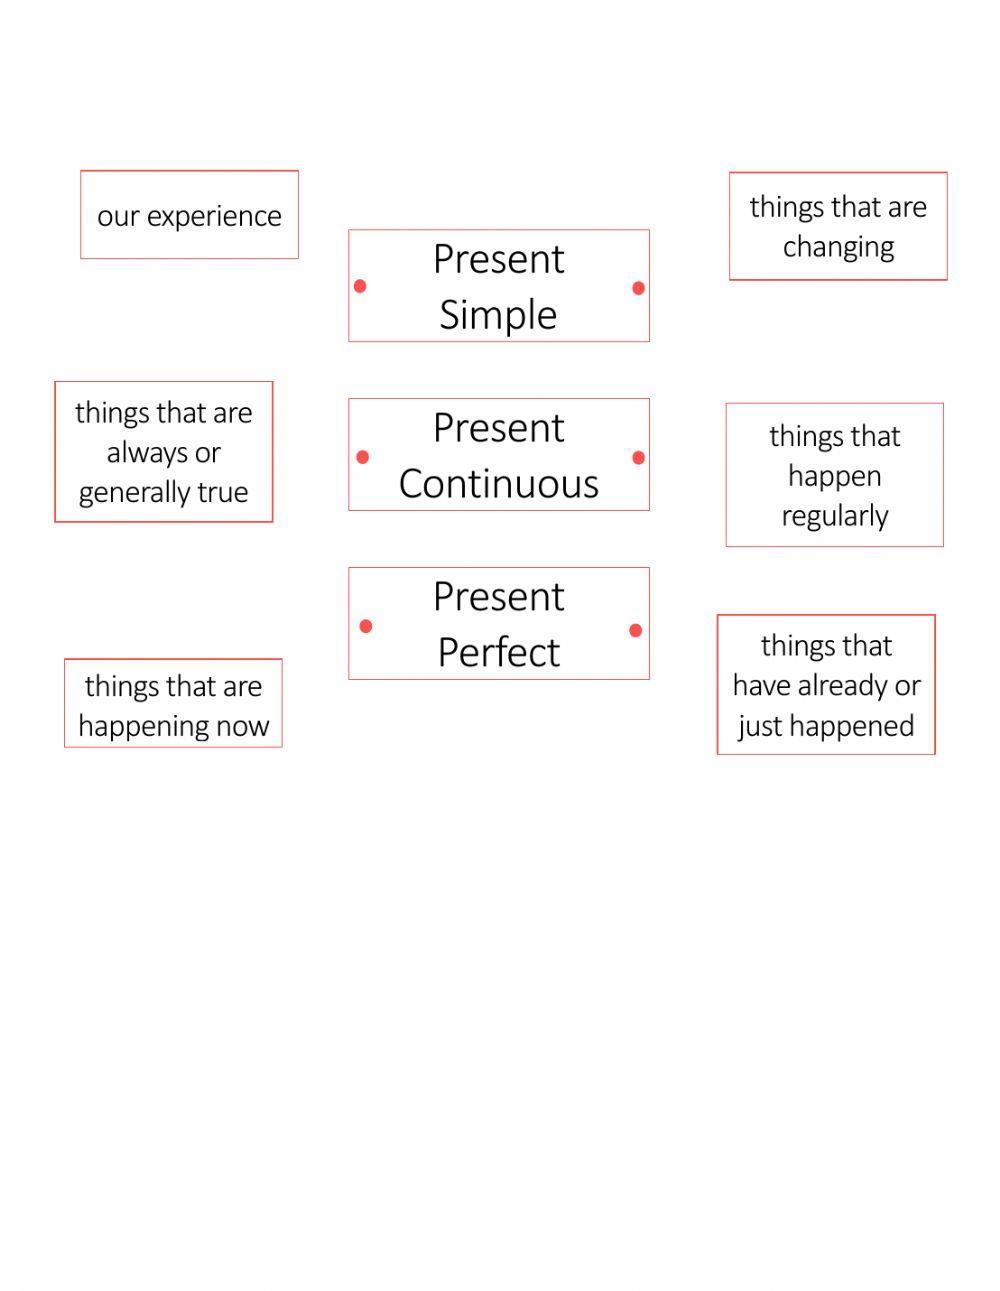 Present simple, present continuous and present perfect uses